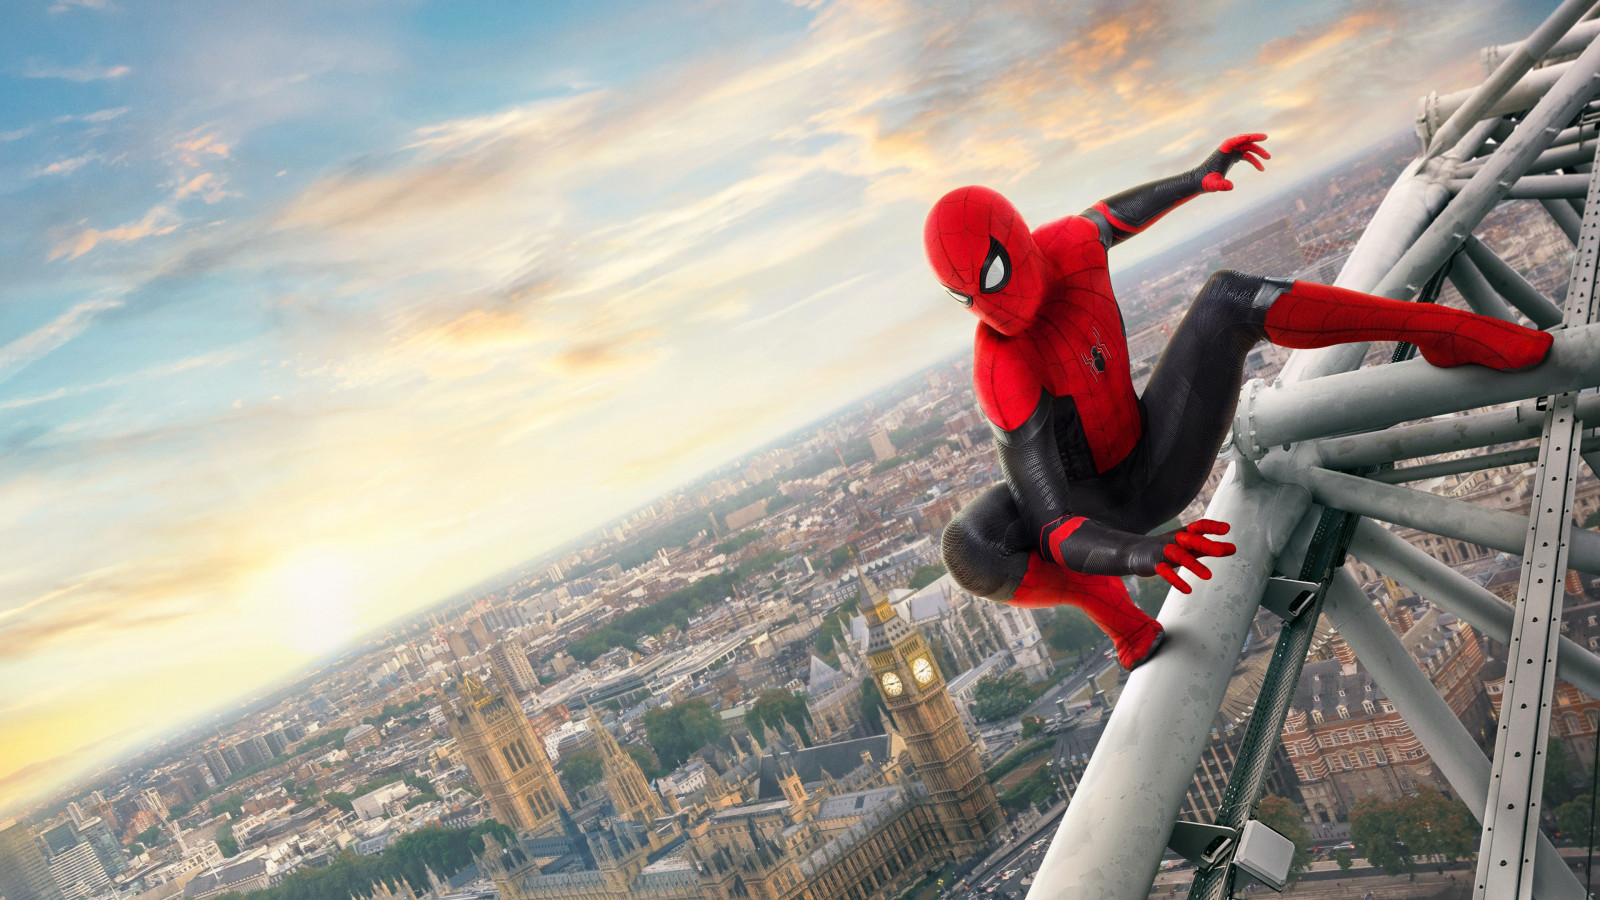 Download wallpaper: Spider Man: Far From Home 2019 1600x900